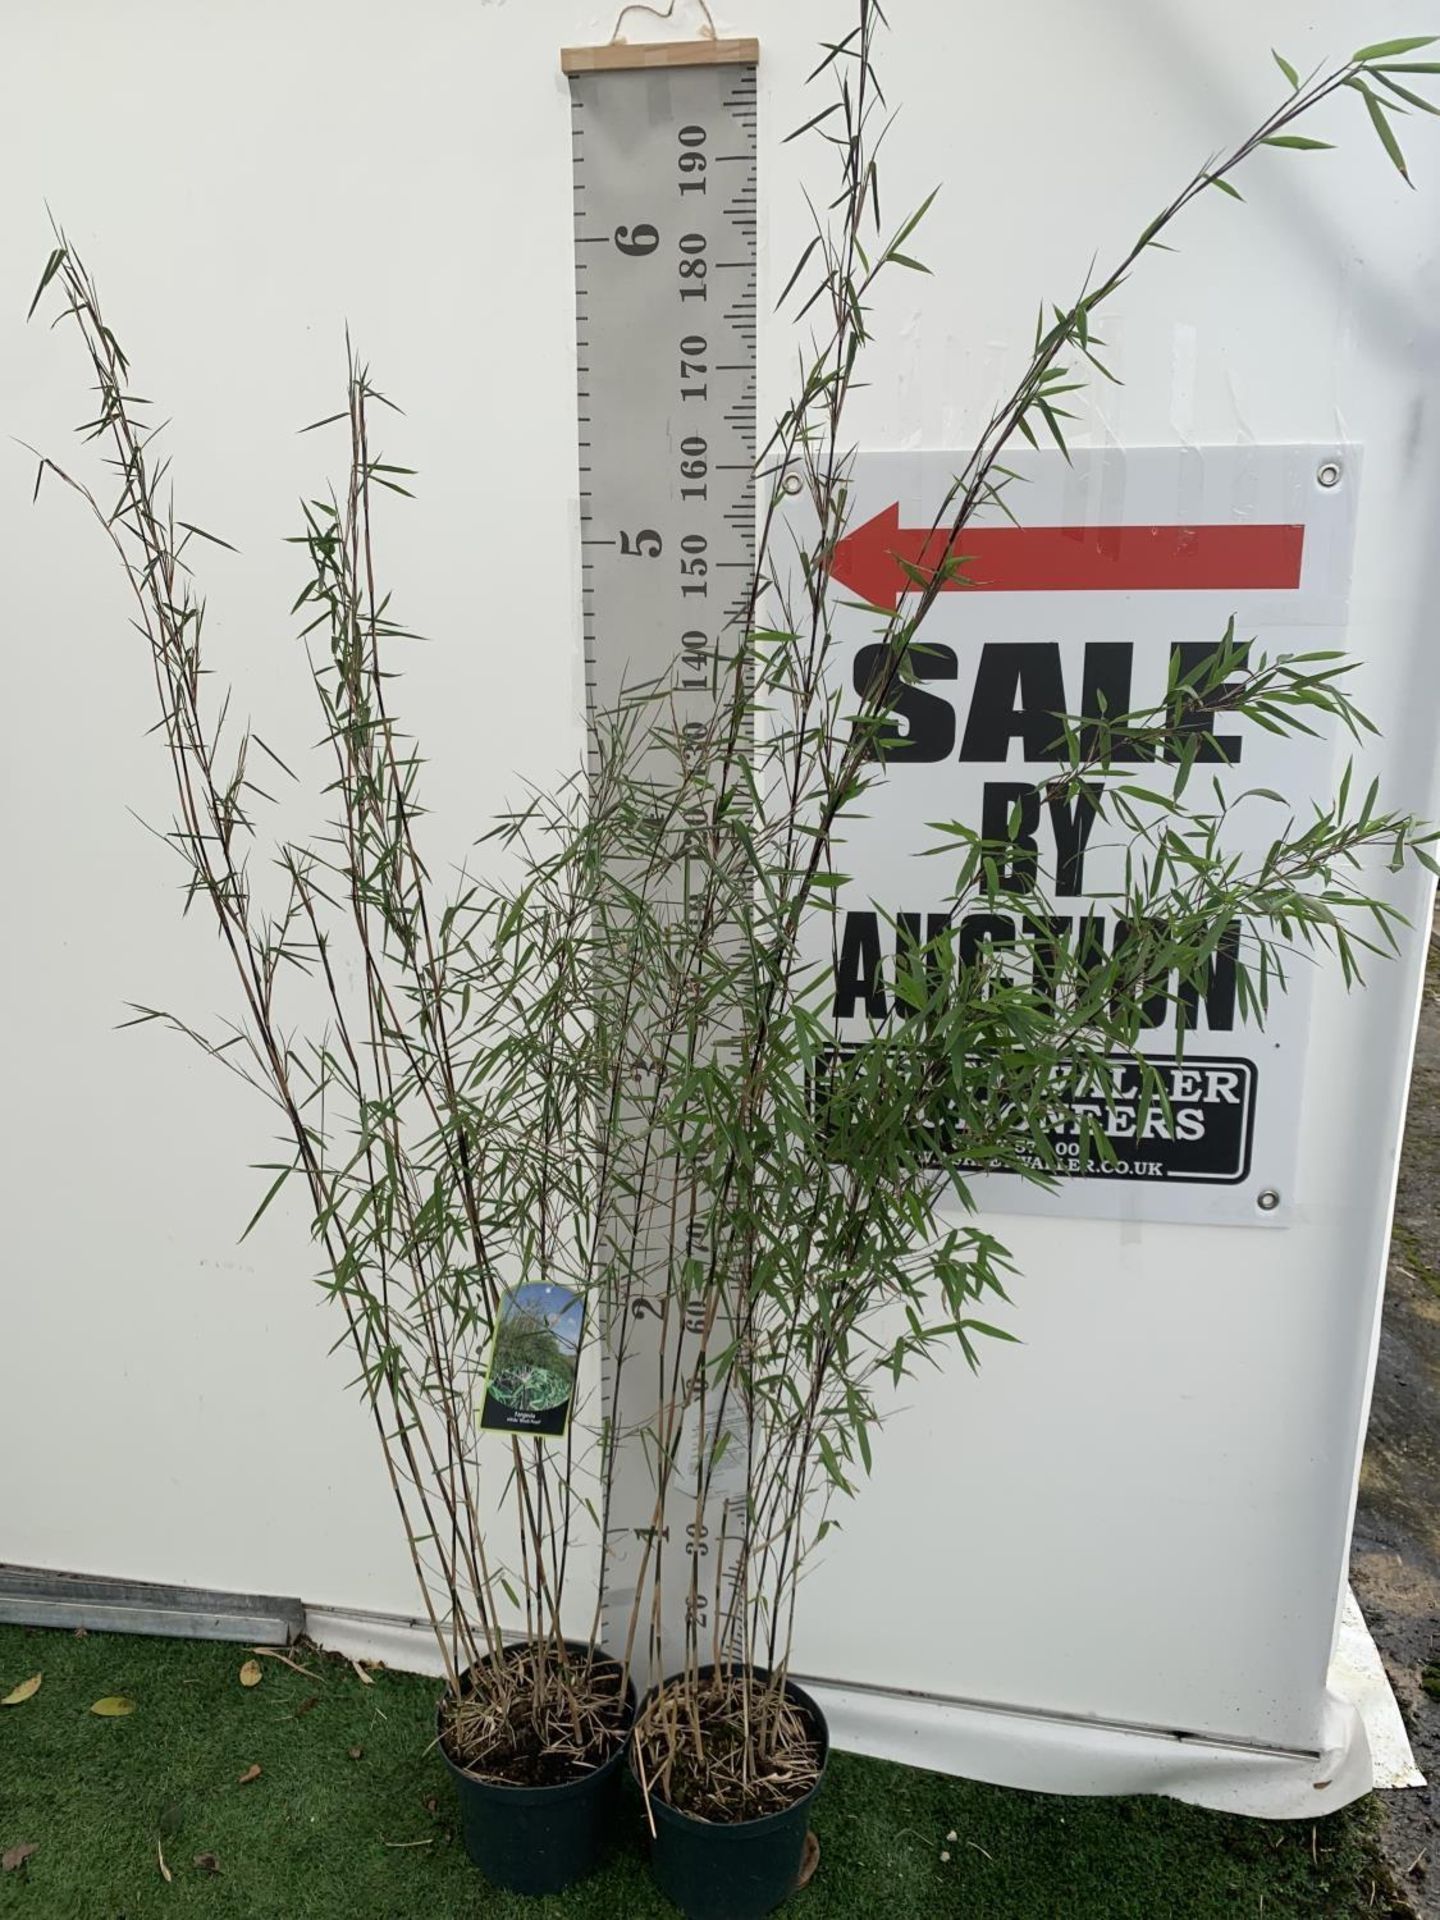 TWO BAMBOO FARGESIA NITIDA 'BLACK PEARL' APPROX 190CM IN HEIGHT IN 5 LTR POTS PLUS VAT TO BE SOLD - Image 2 of 5